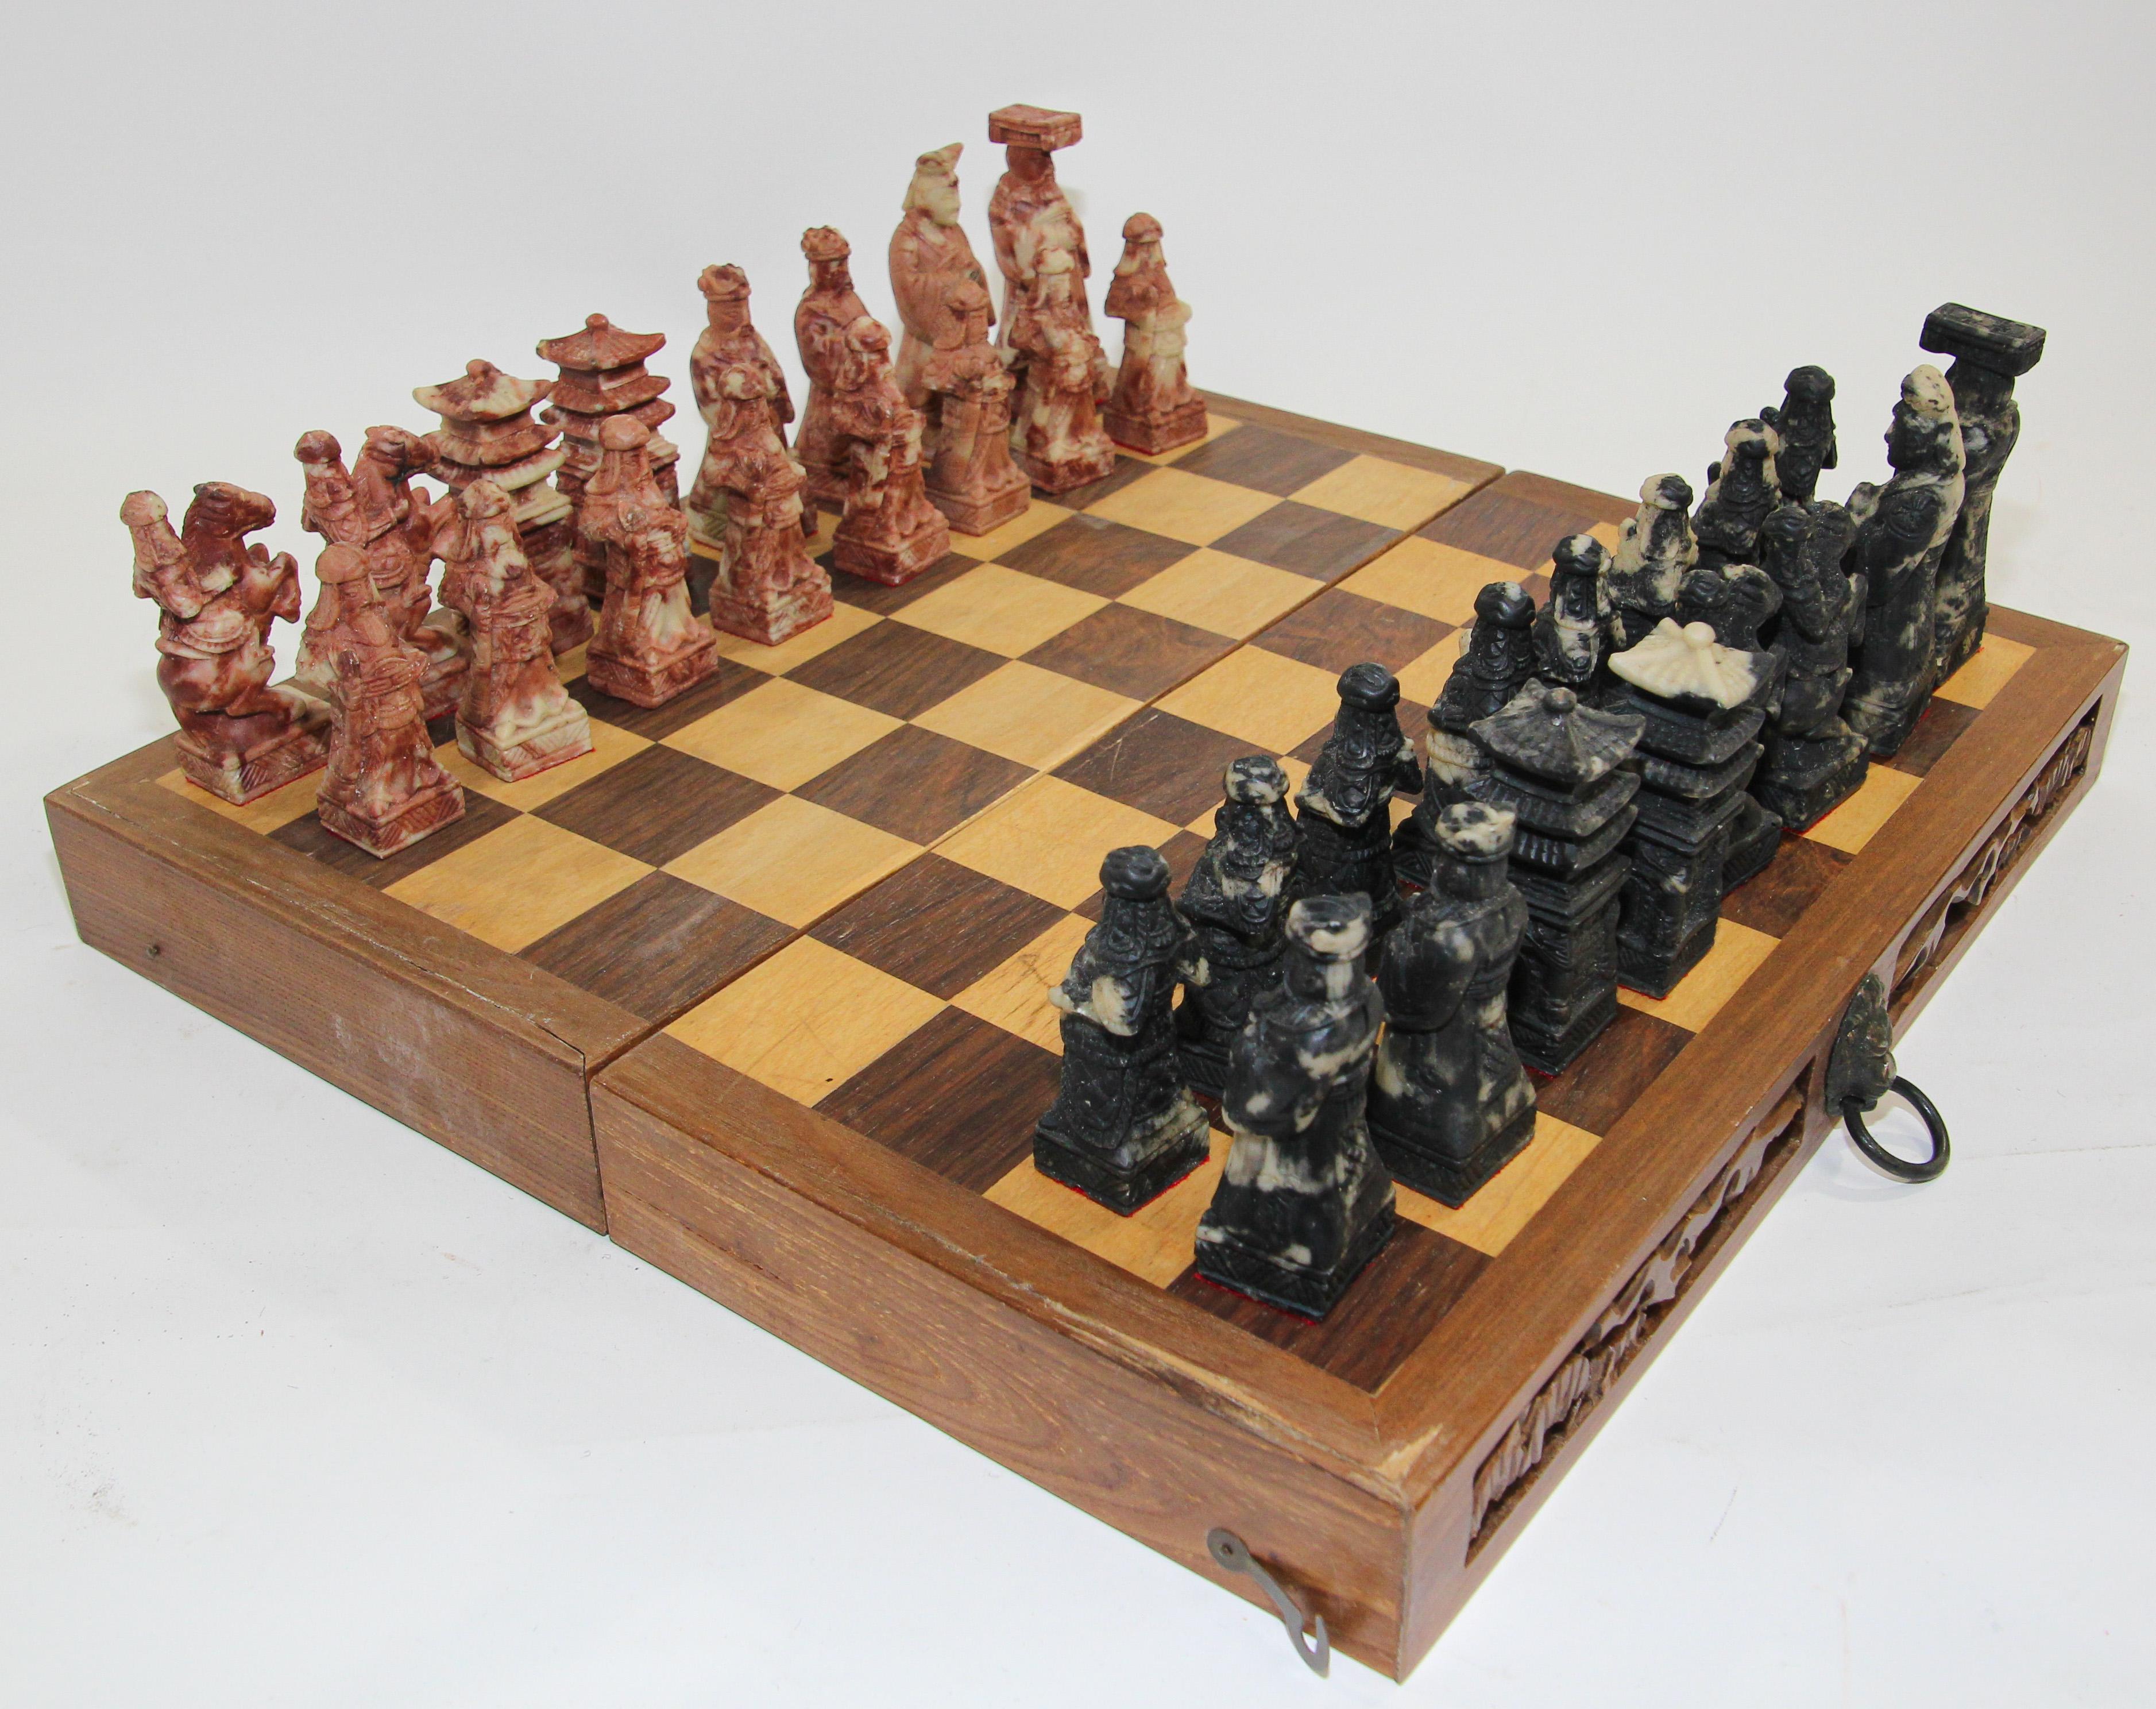 Vintage Asian Hand carved Soap stone chess set in box.
The wooden box fold with the front hand carved and closing with a lion head design.
The board folds up for easy storage. Green felt house the chess pawns on each side. 
Hand-carved of soap